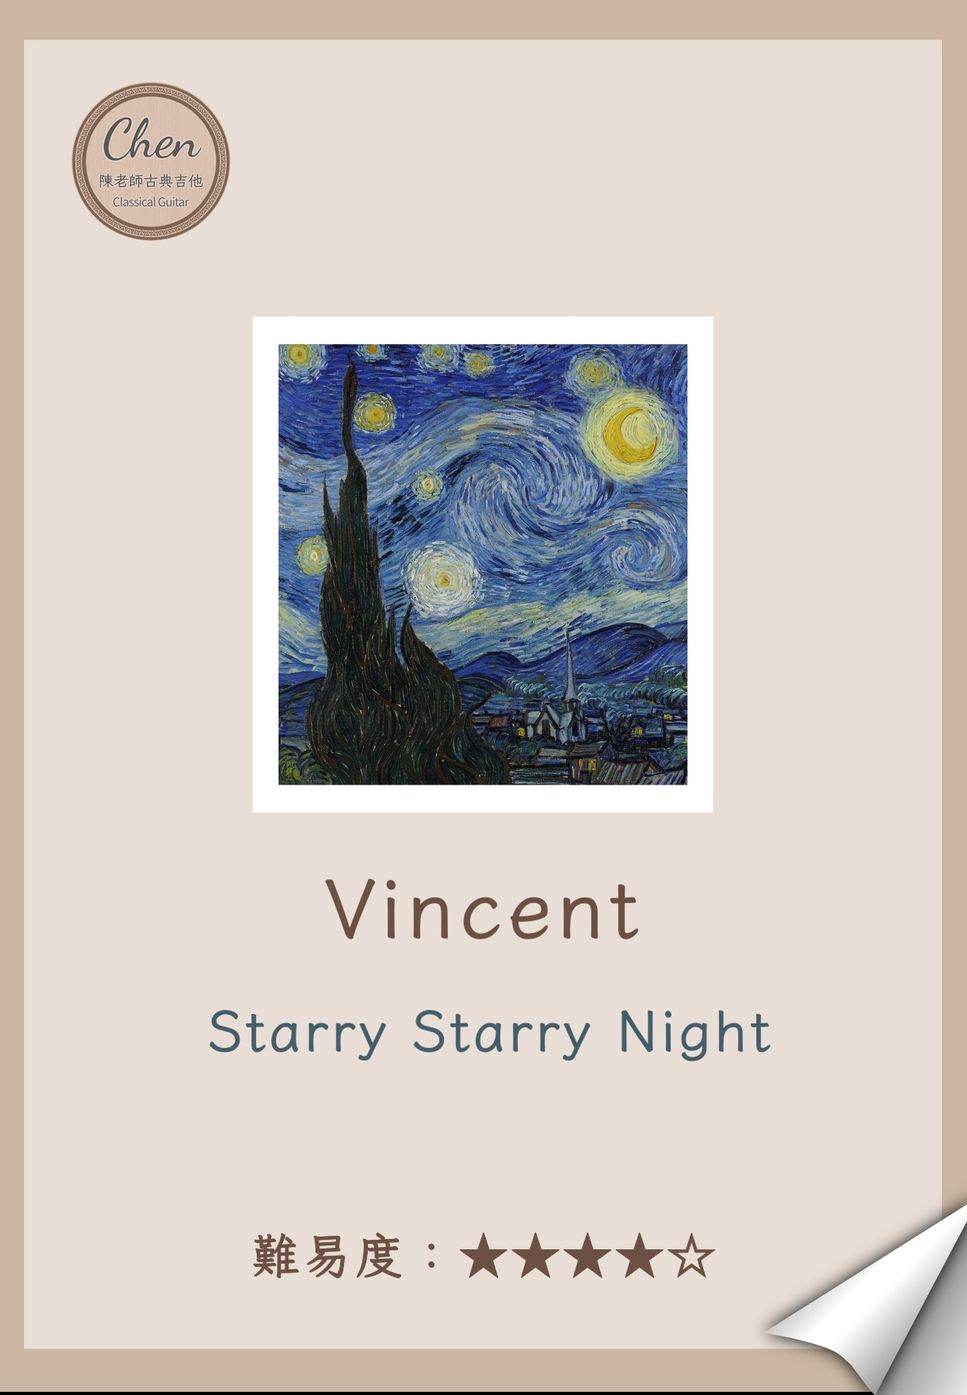 Don McLean - Vincent(Starry Starry Night) by 陳老師古典吉他